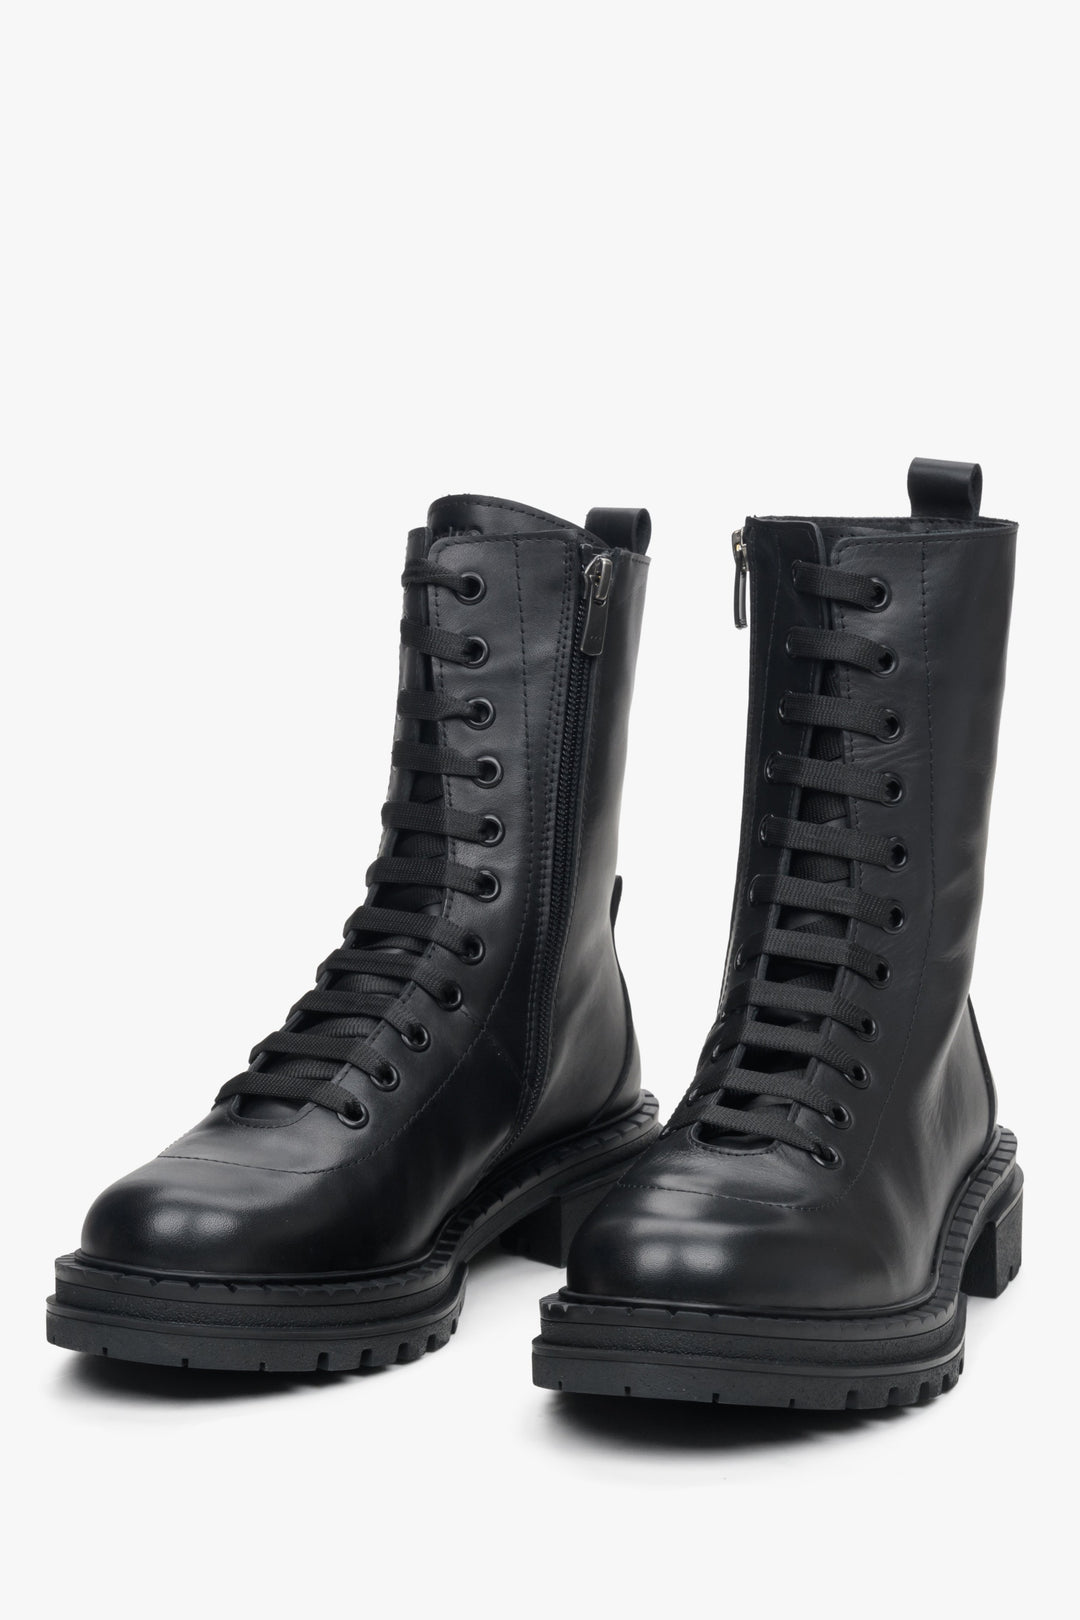 Women's black ankle boots in genuine leather by Estro - close-up on the front of the model.